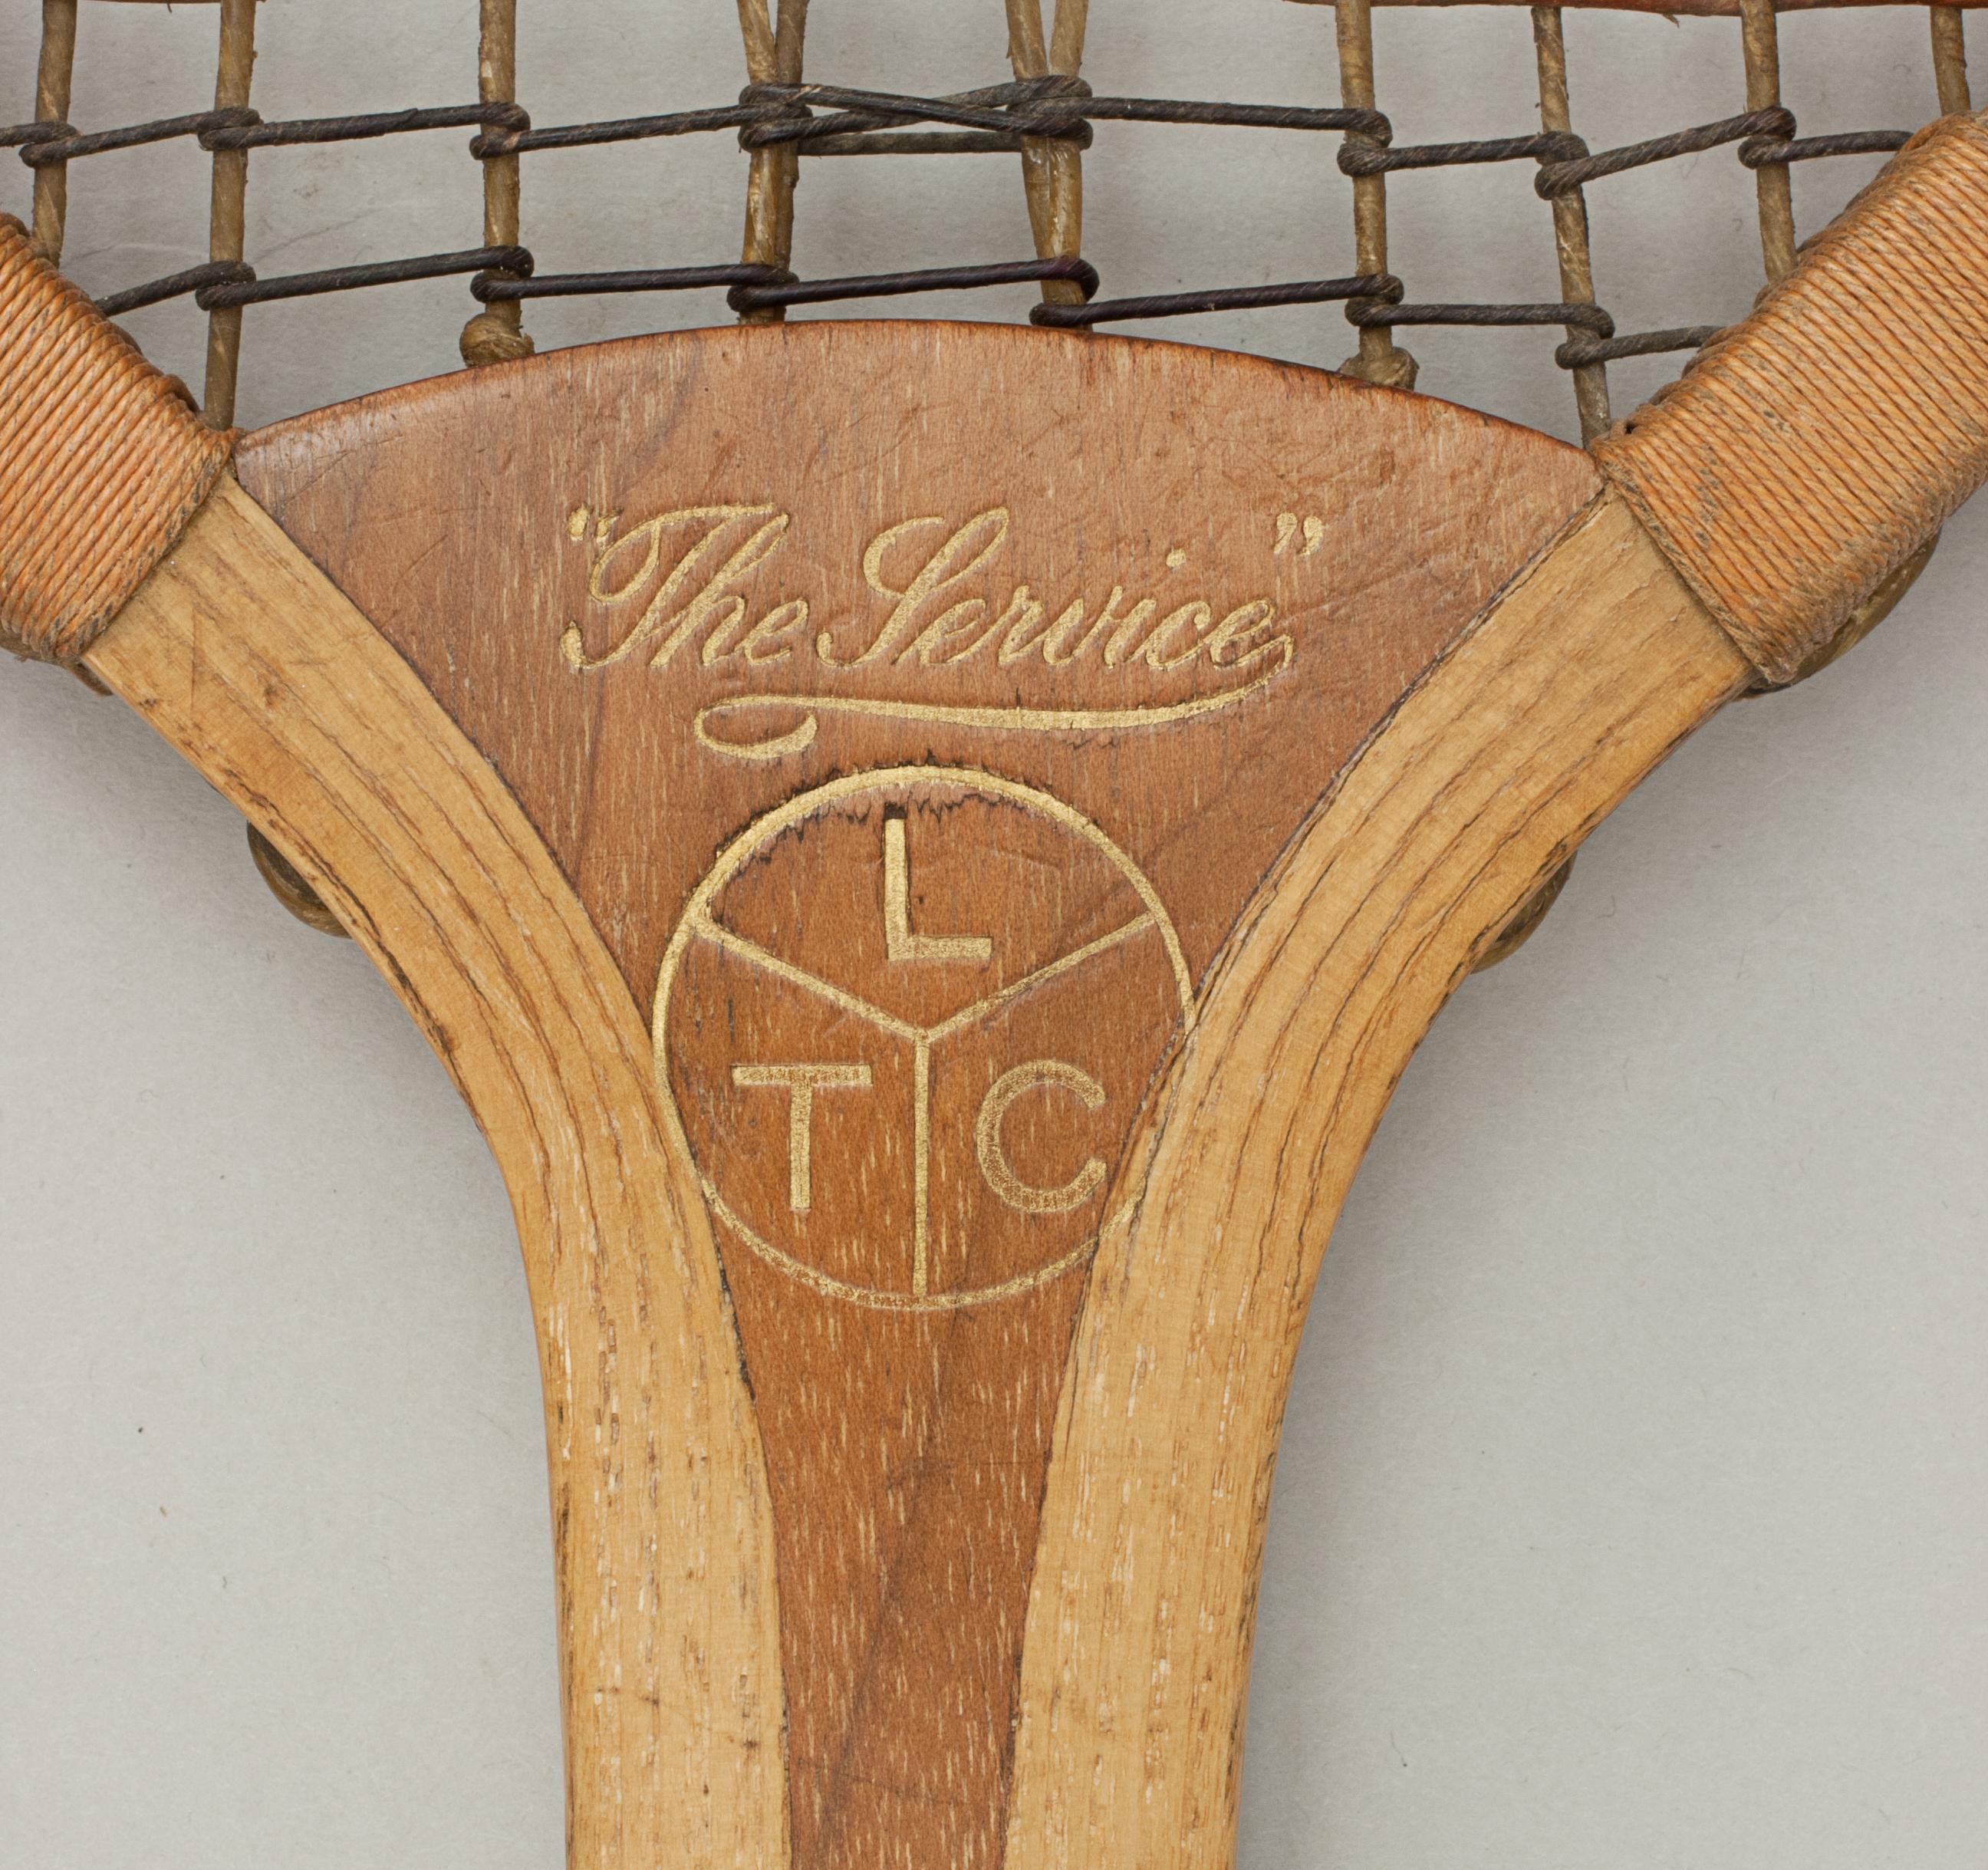 Wooden Lawn Tennis Racket, the Service, Ltc For Sale 3